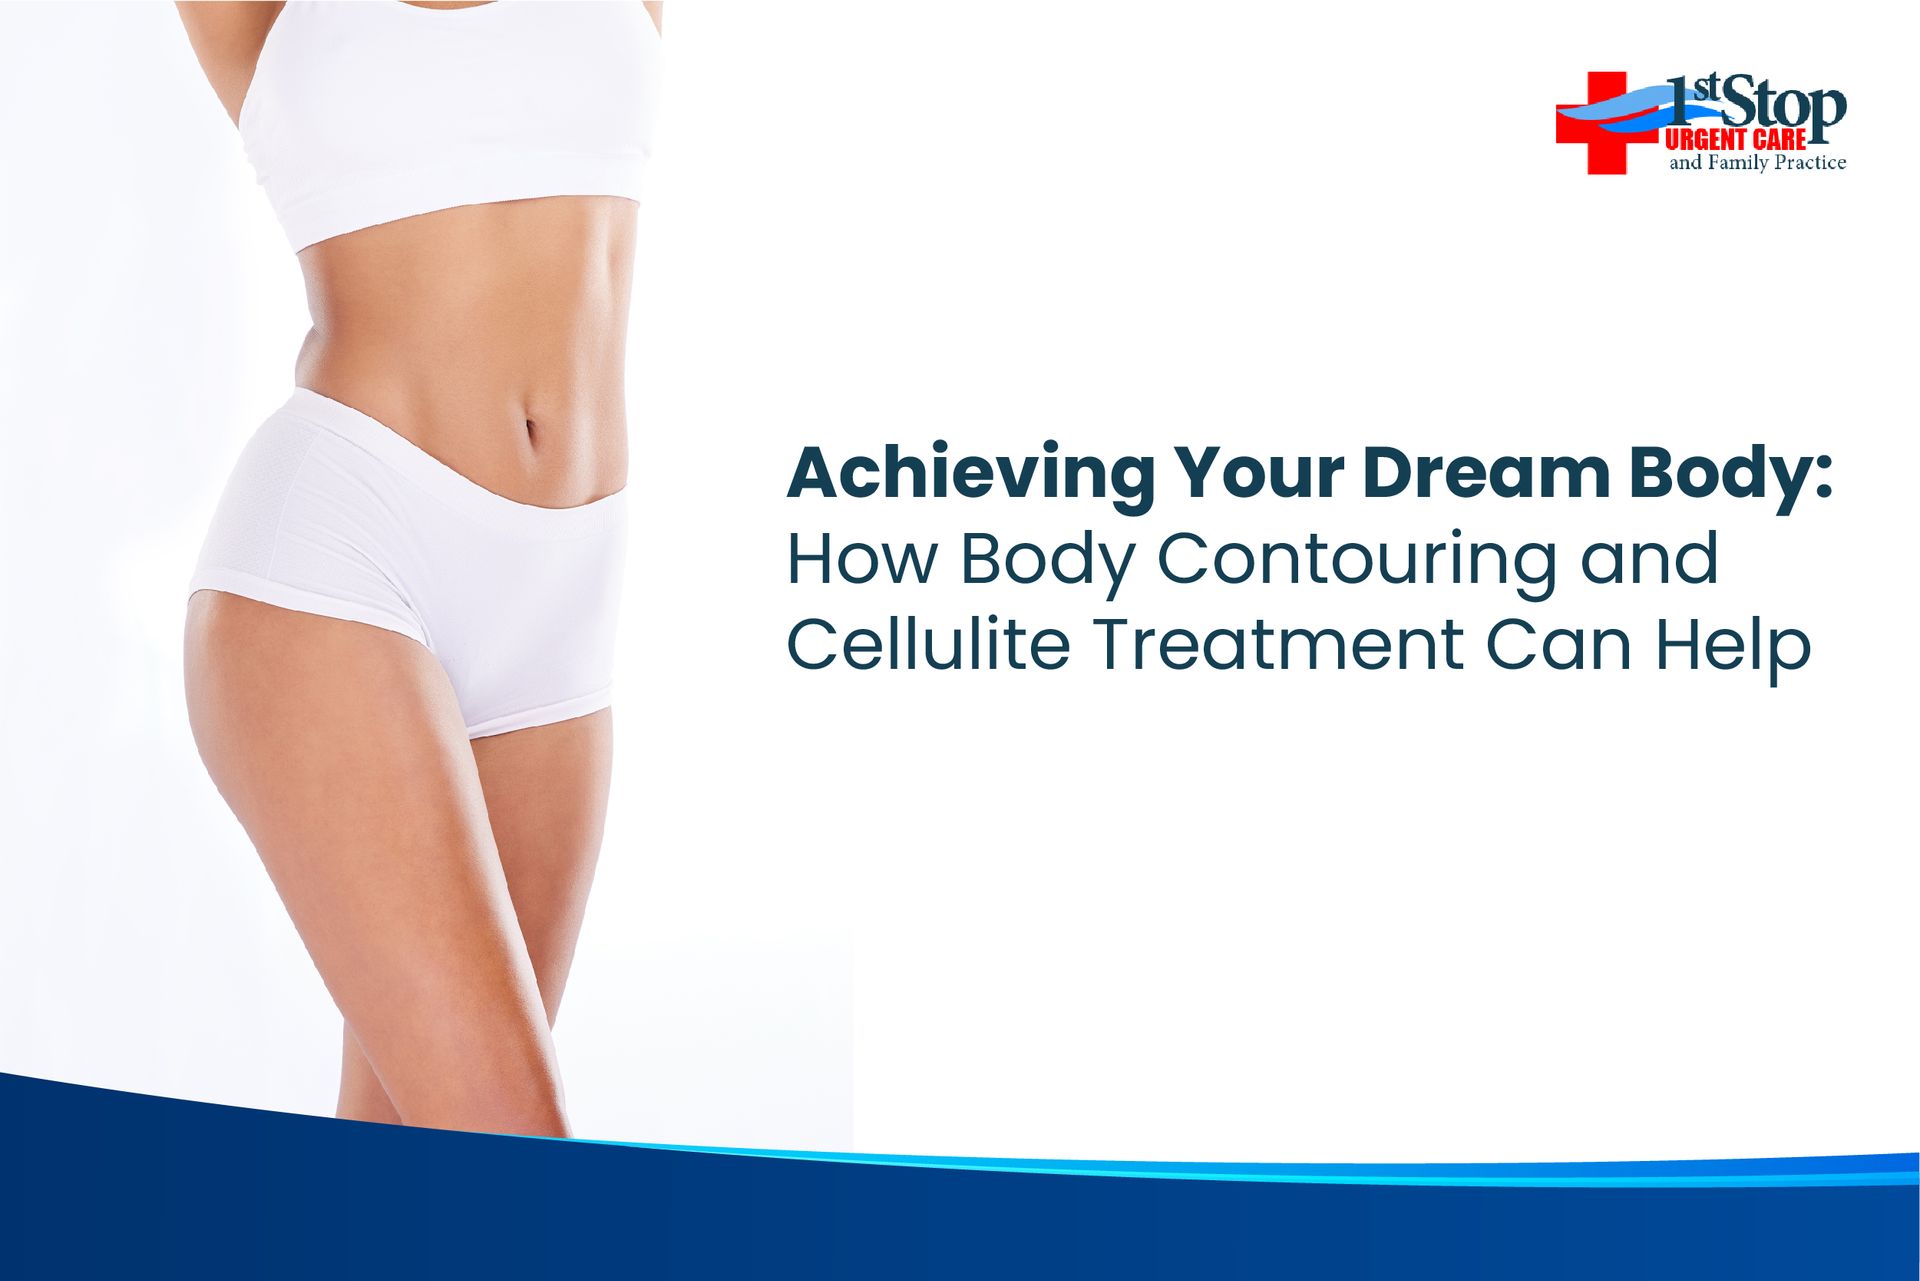 Achieving Your Dream Body: How Body Contouring and Cellulite Treatment Can Help